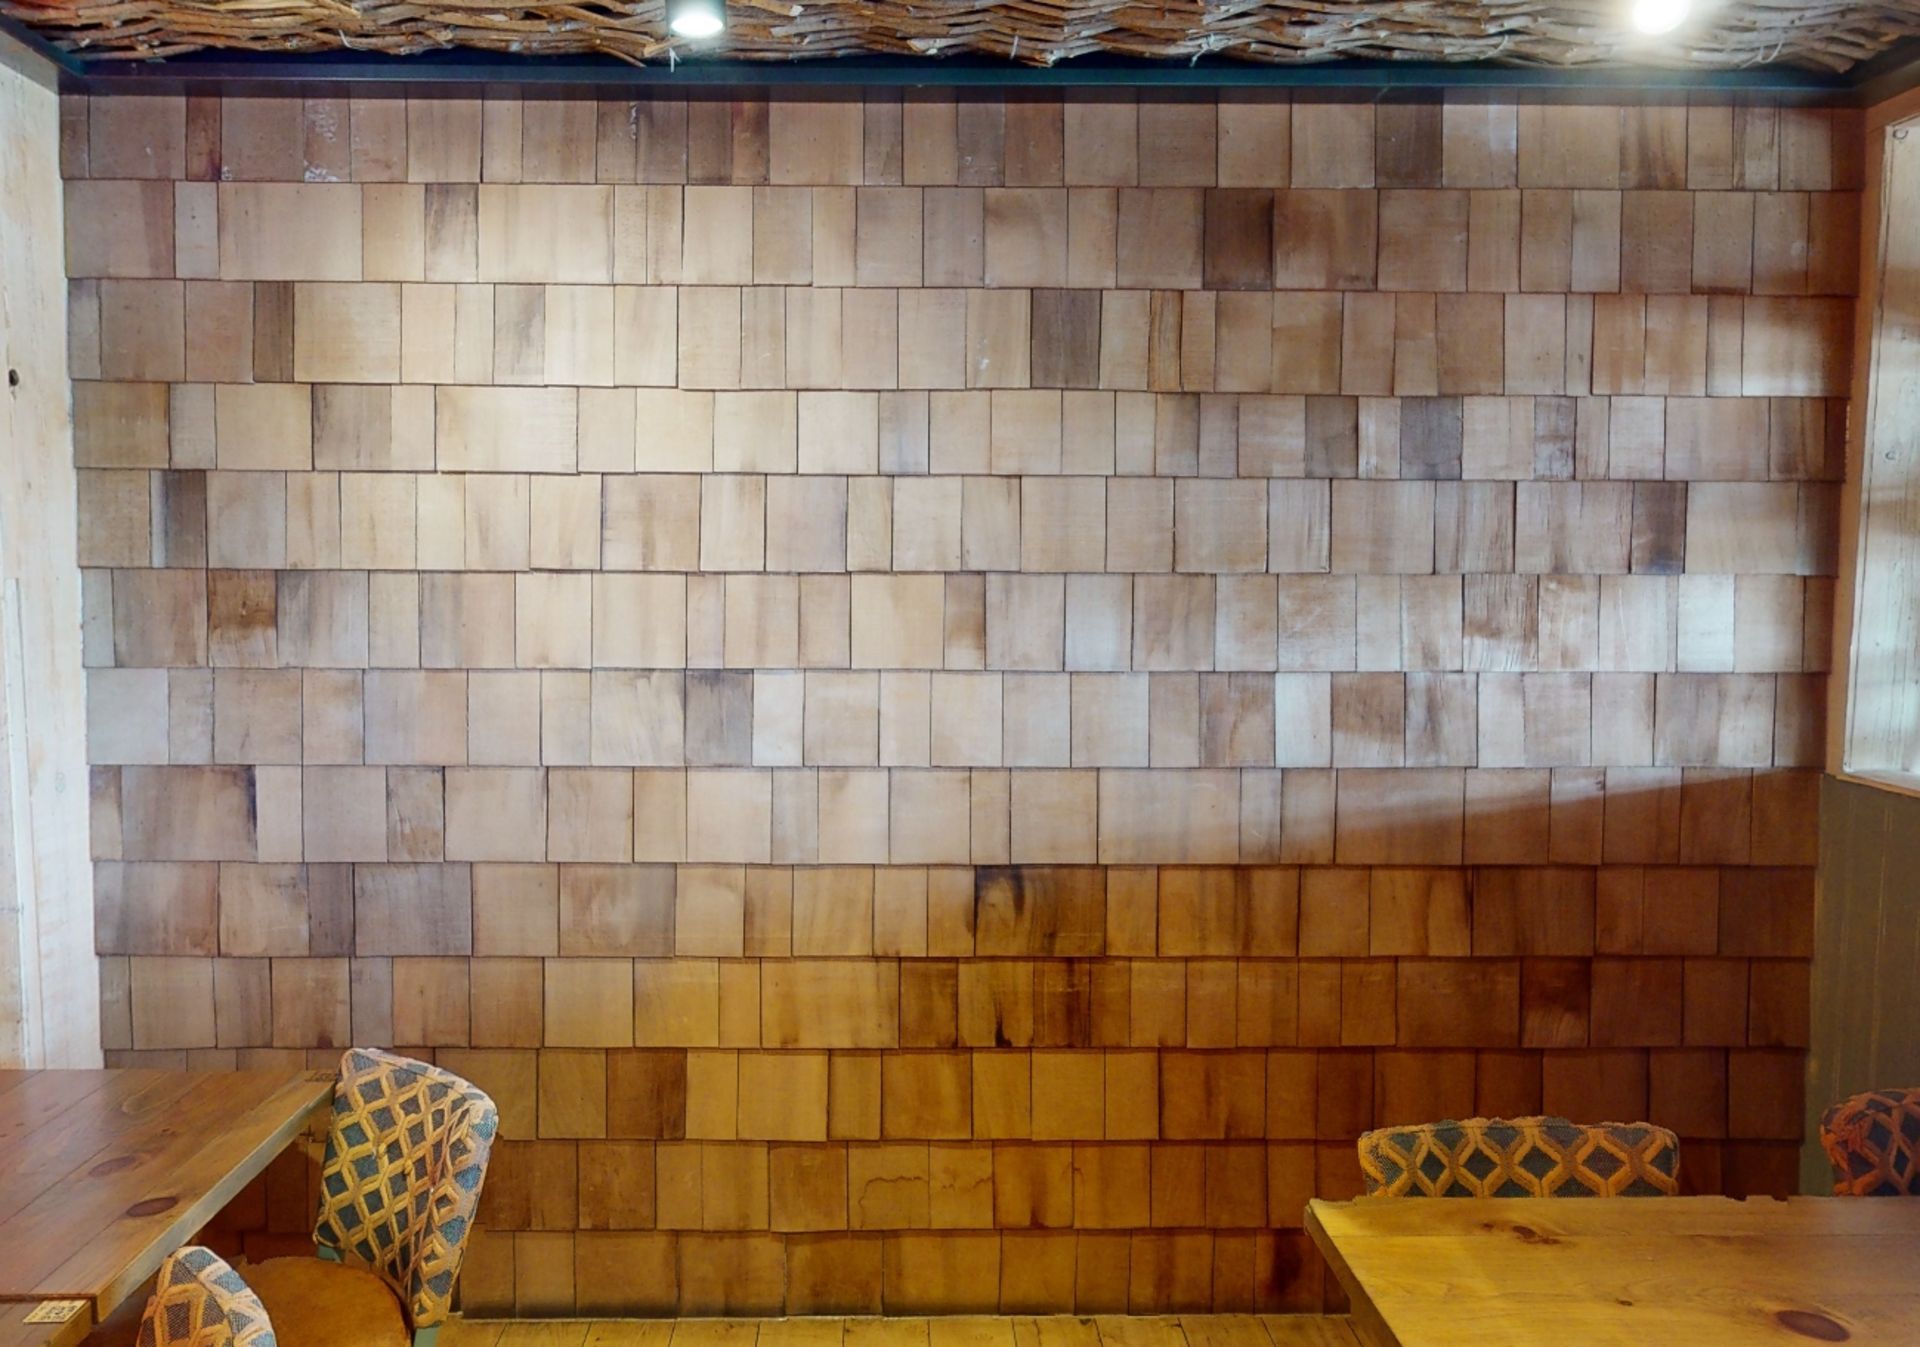 1 x Overlapping Wooden Tile Wall Decoration Covering - Approx Size: H260 x W360 cms - Image 2 of 2